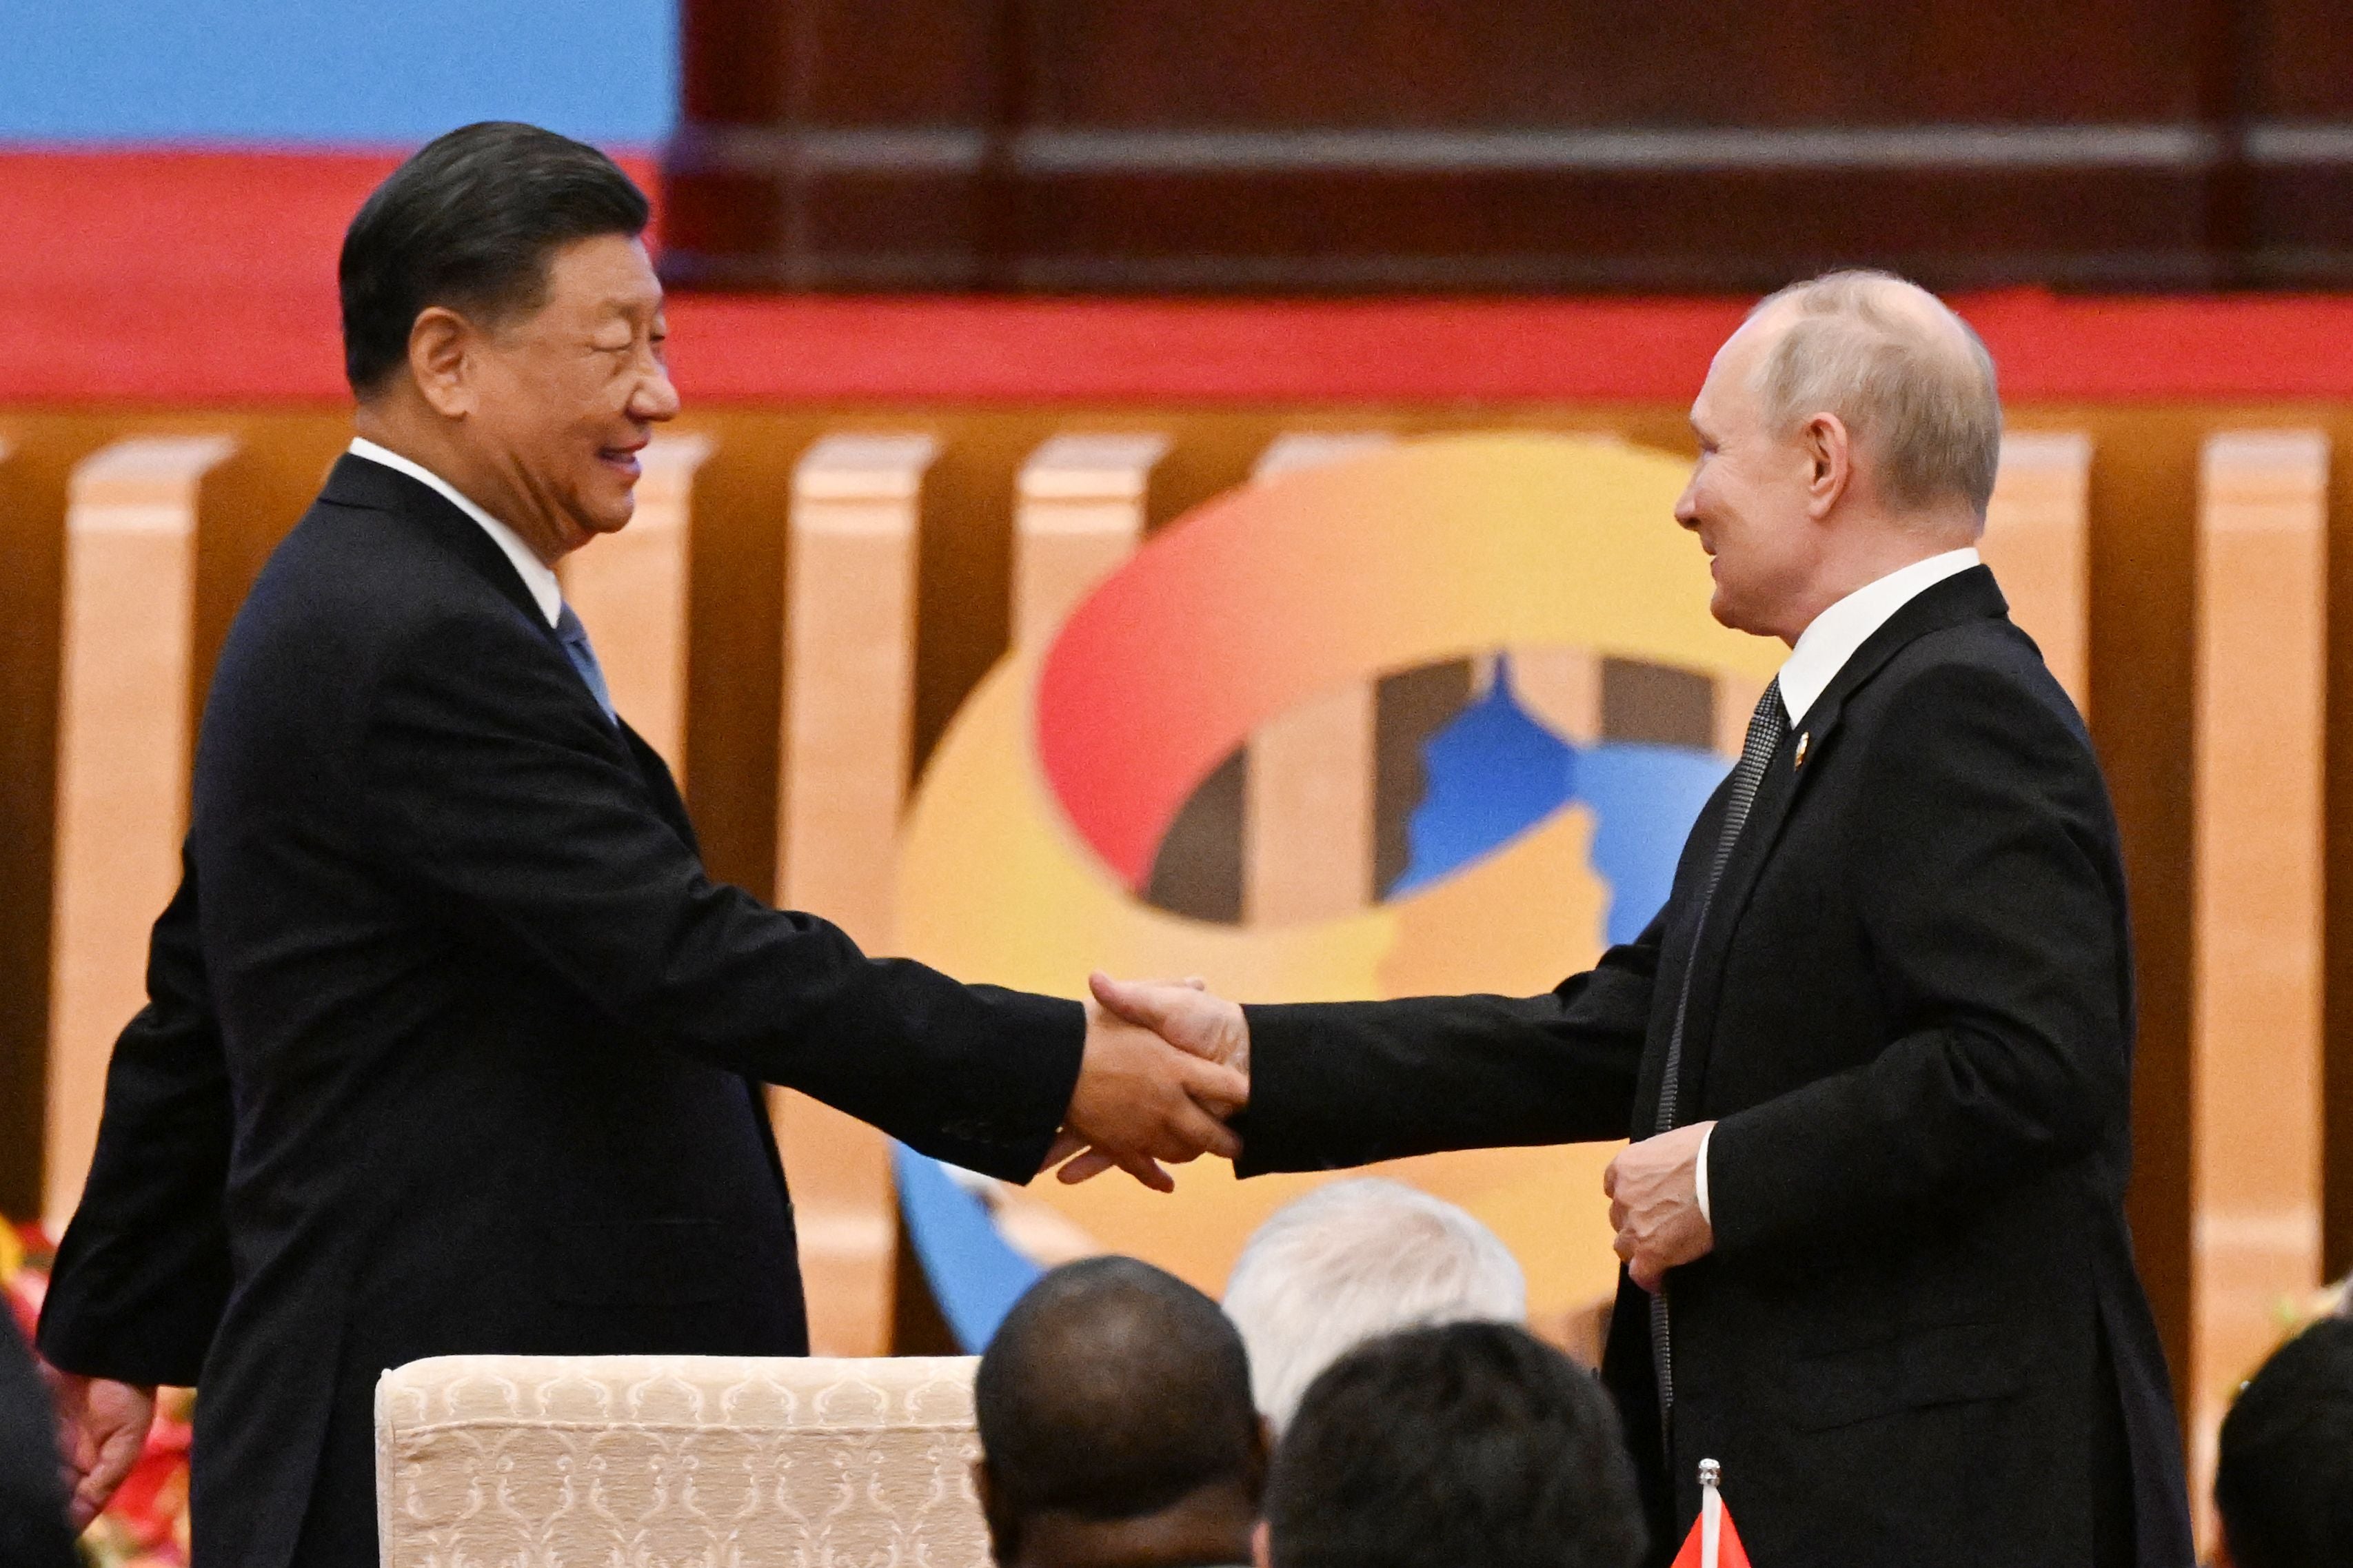 Xi Jinping shakes hands with Vladimir Putin at the Belt and Road summit in the Great Hall of the People in Beijing